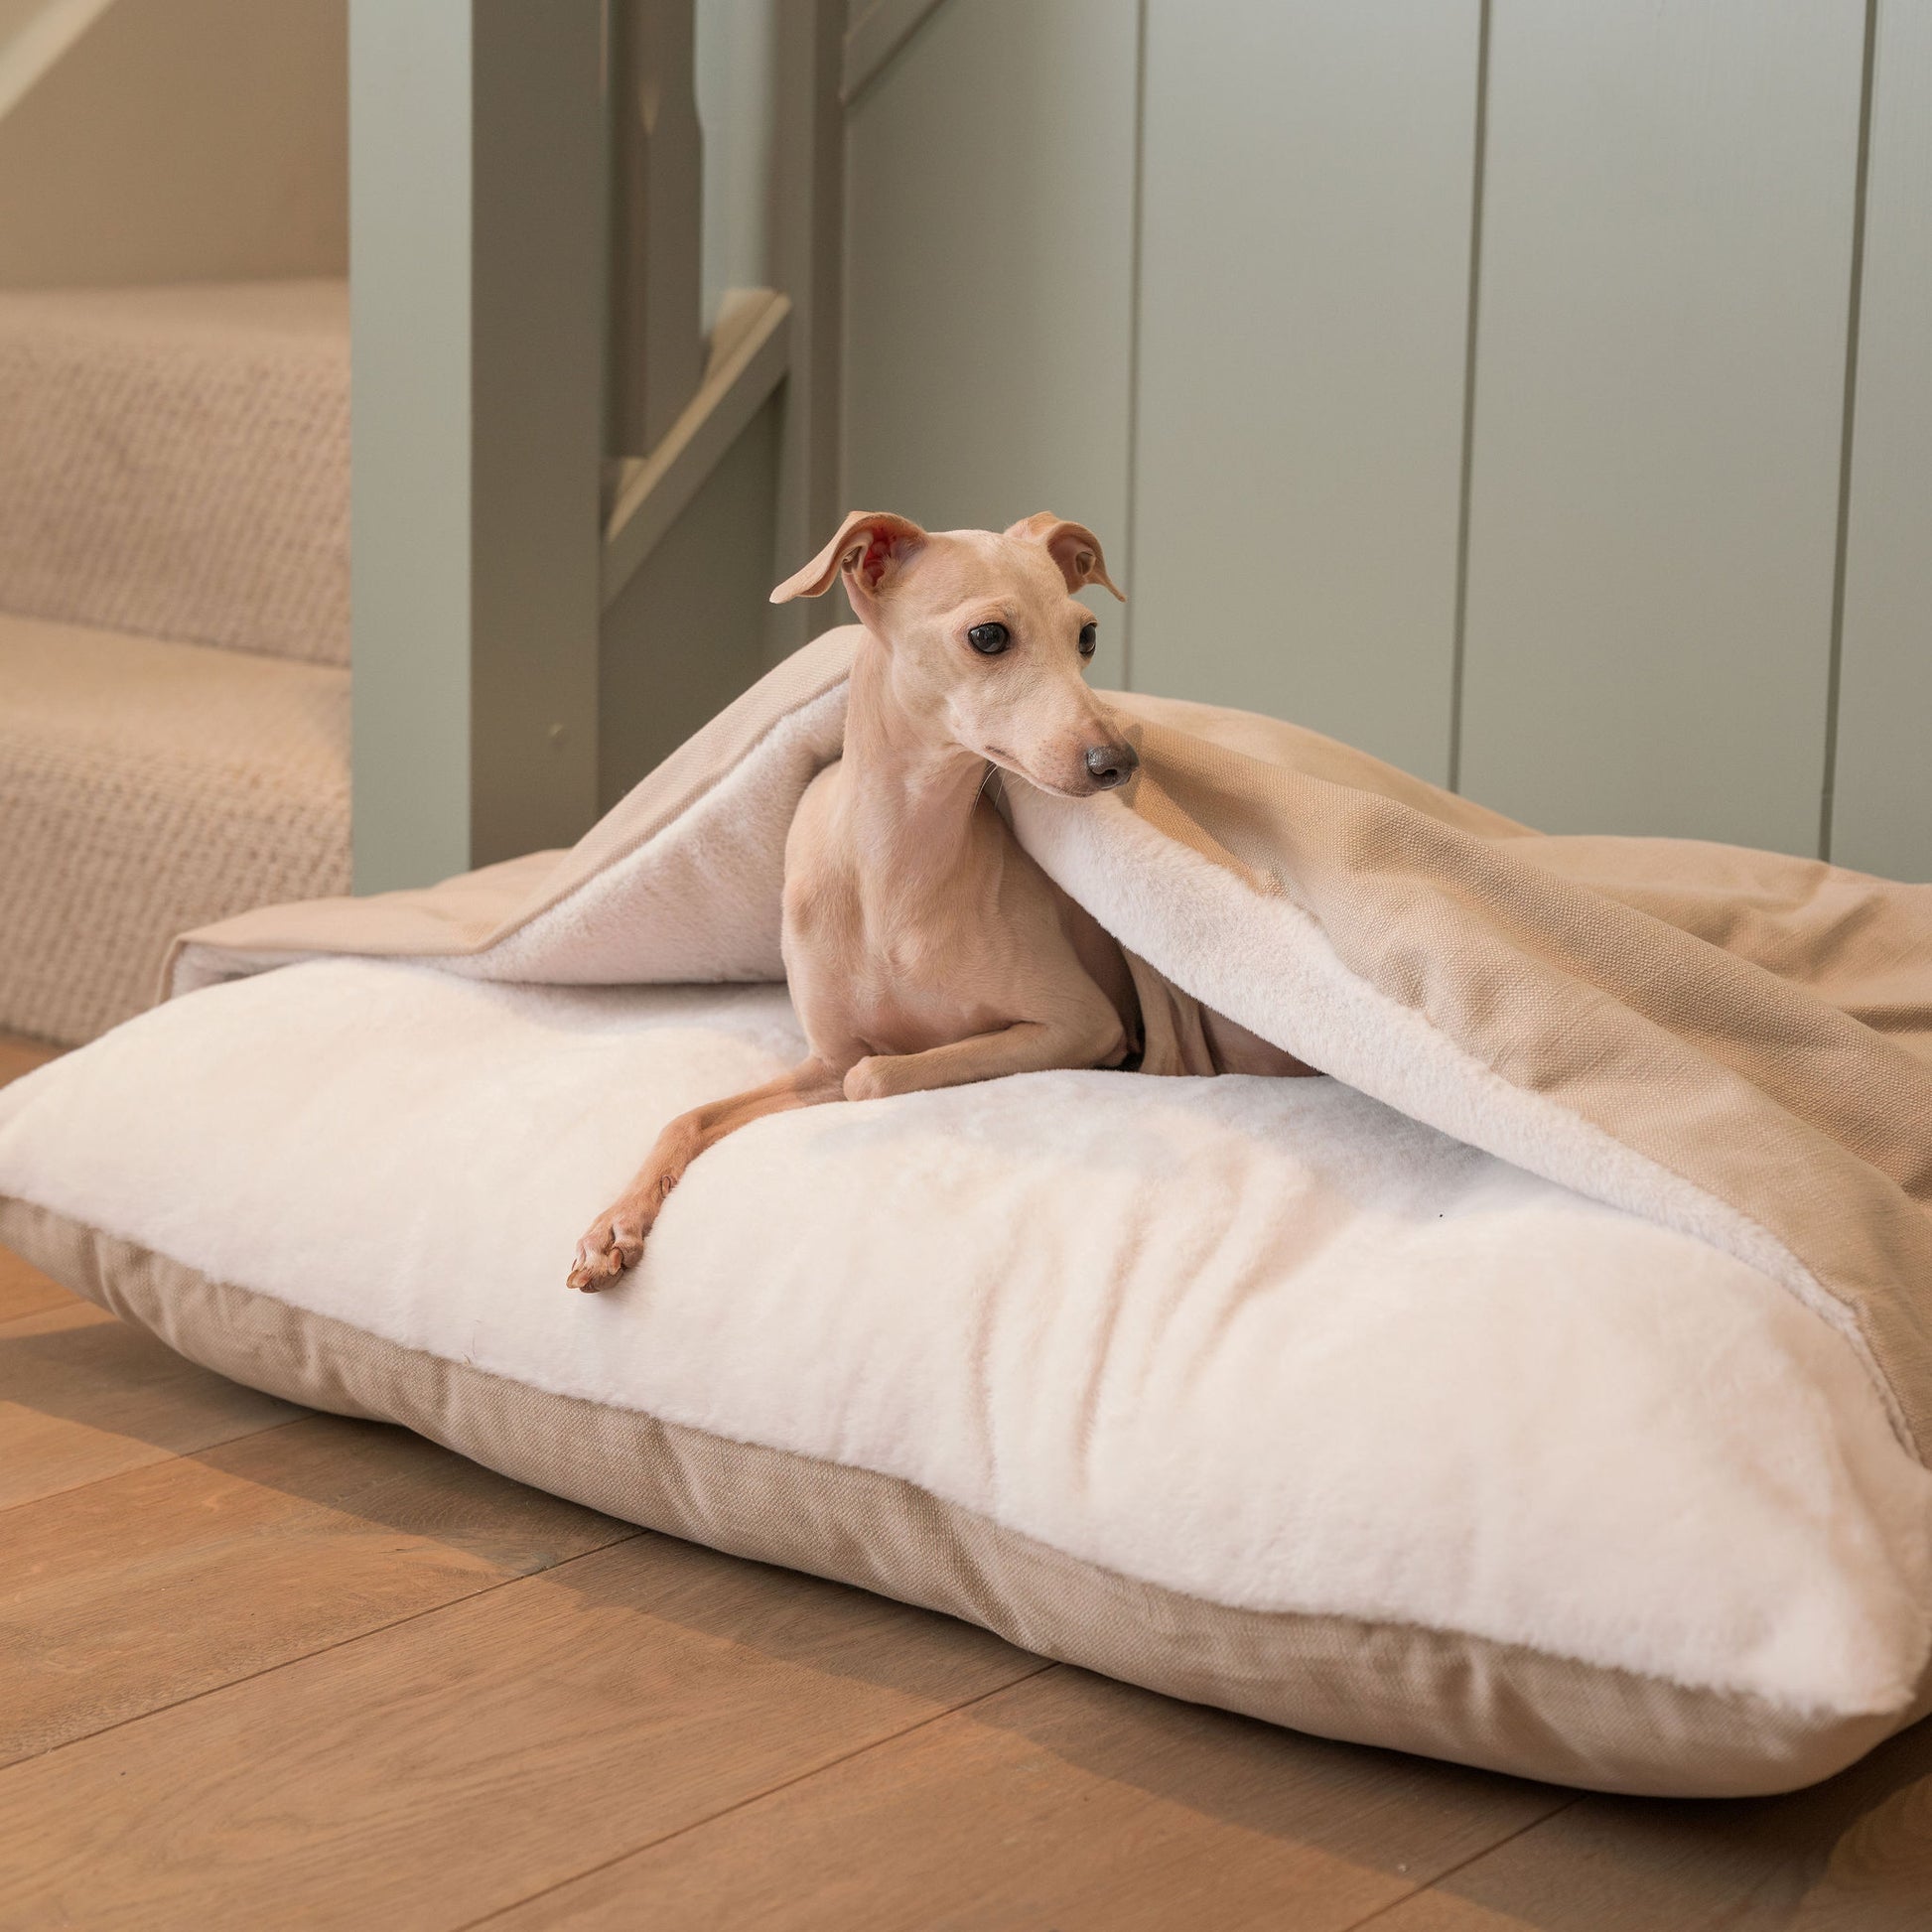 Luxury Savanna Sleepy Burrow, The Perfect bed For a Pet to Burrow. Available To Personalise In Stunning Savanna Oatmeal, Here at Lords & Labradors